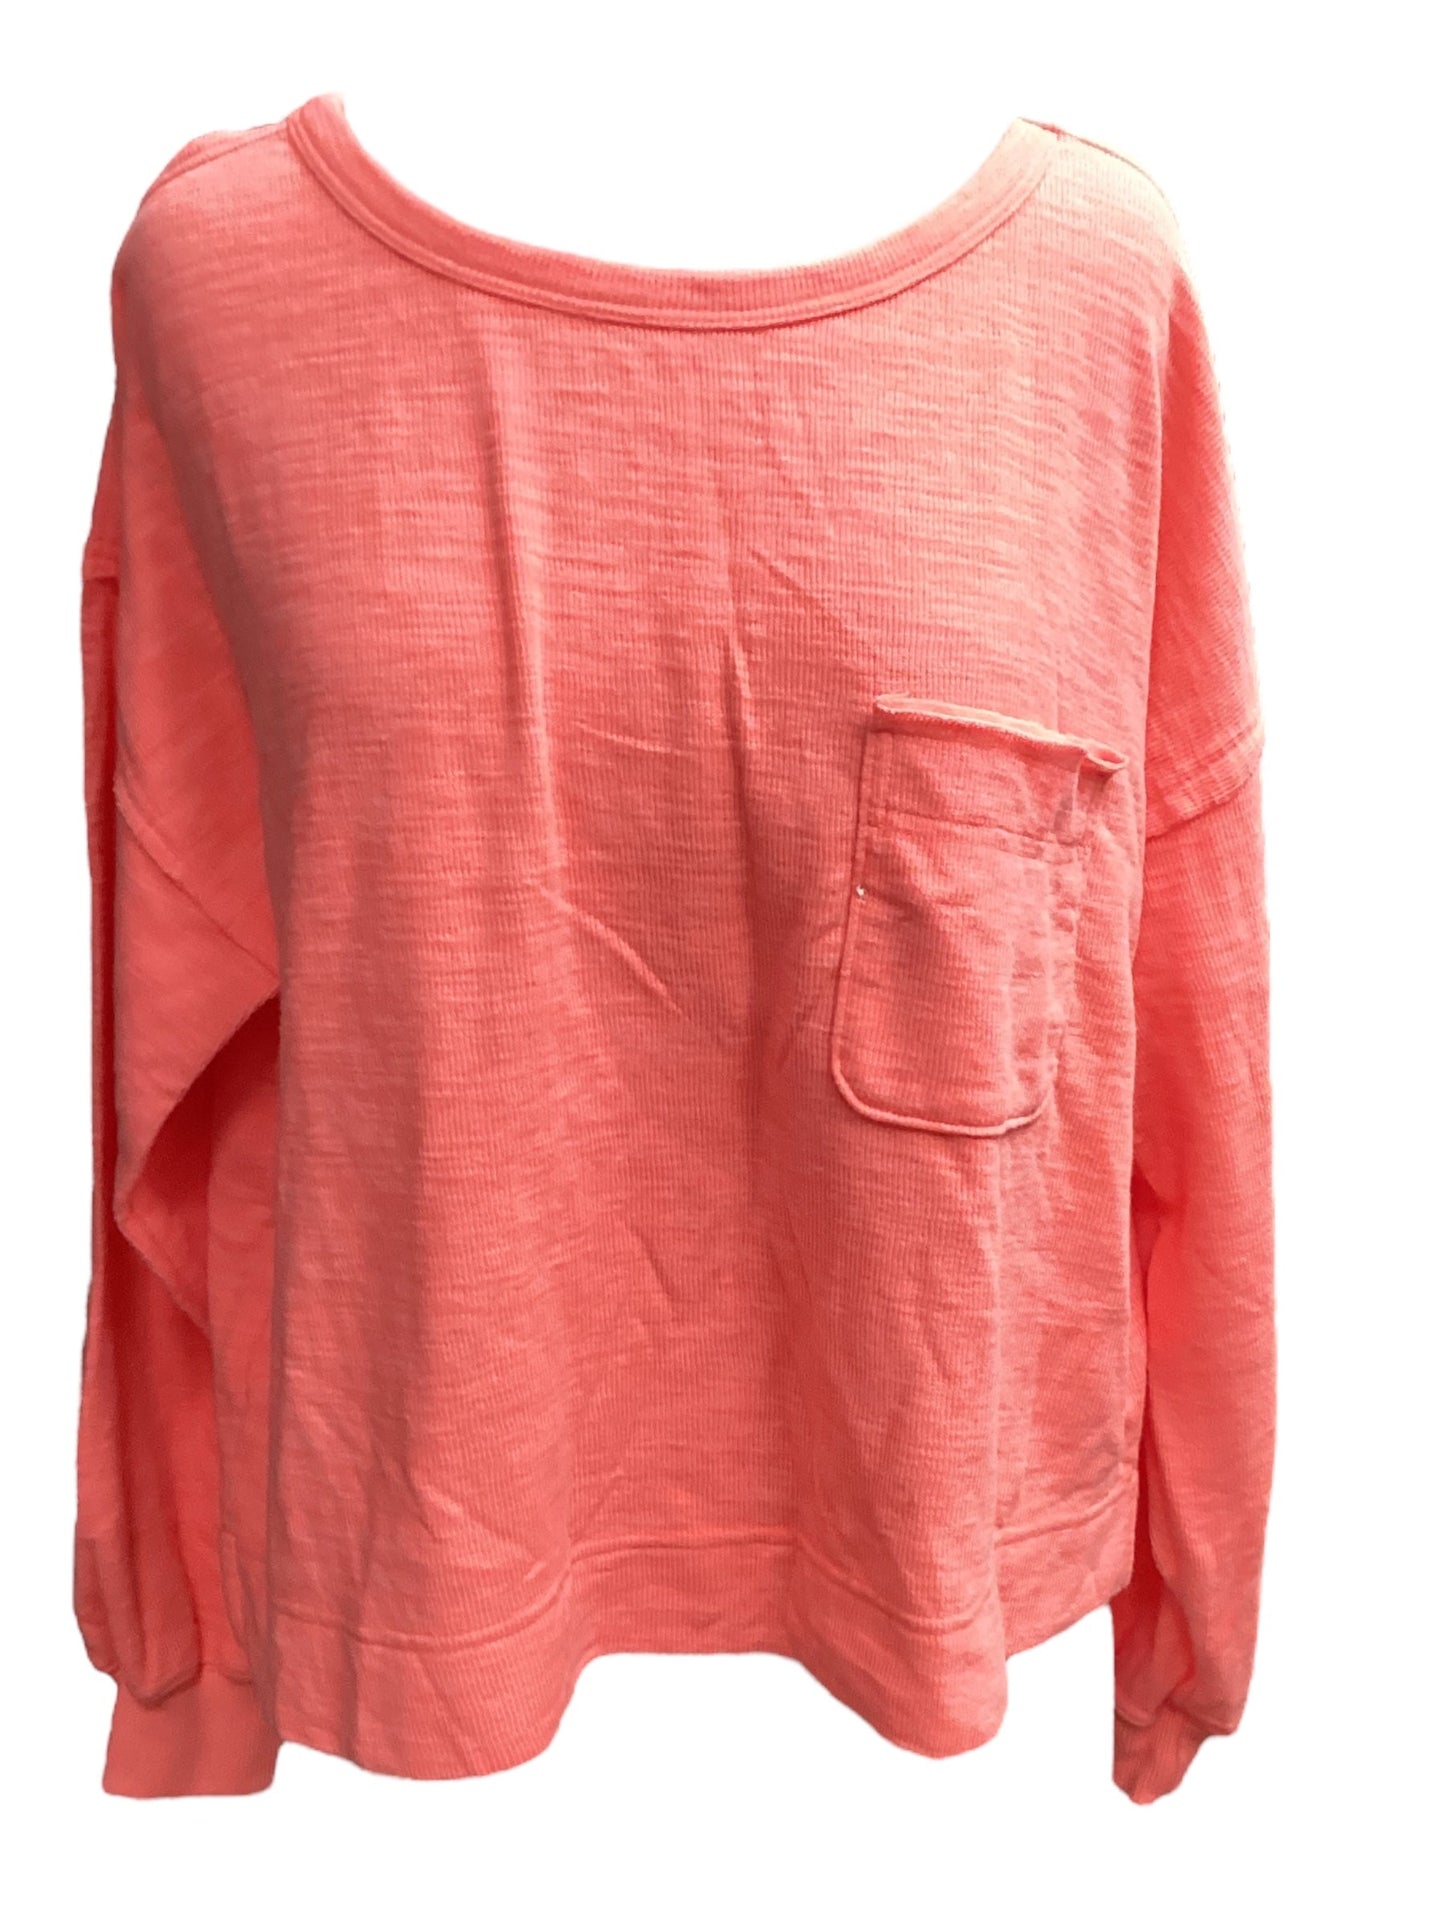 Coral Top Long Sleeve Aerie, Size M